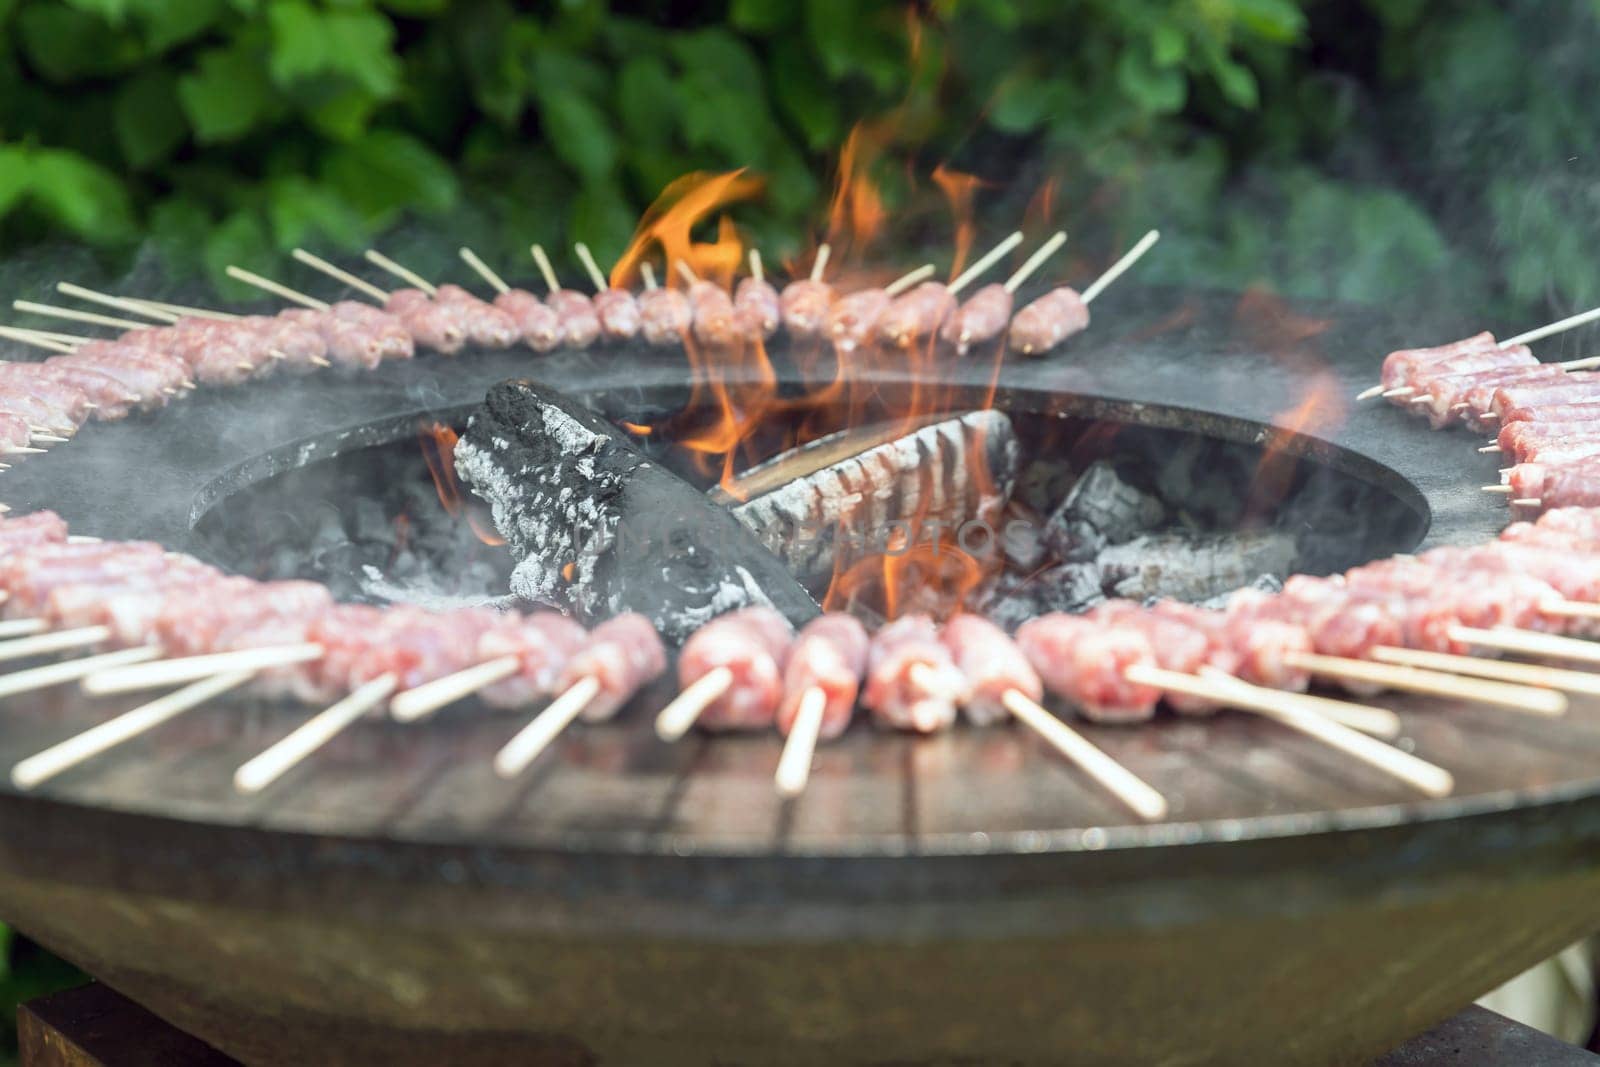 Sausage cooking on a wood brazier. This new concept enhances the advantages of cooking barbecue on a wood brazier.